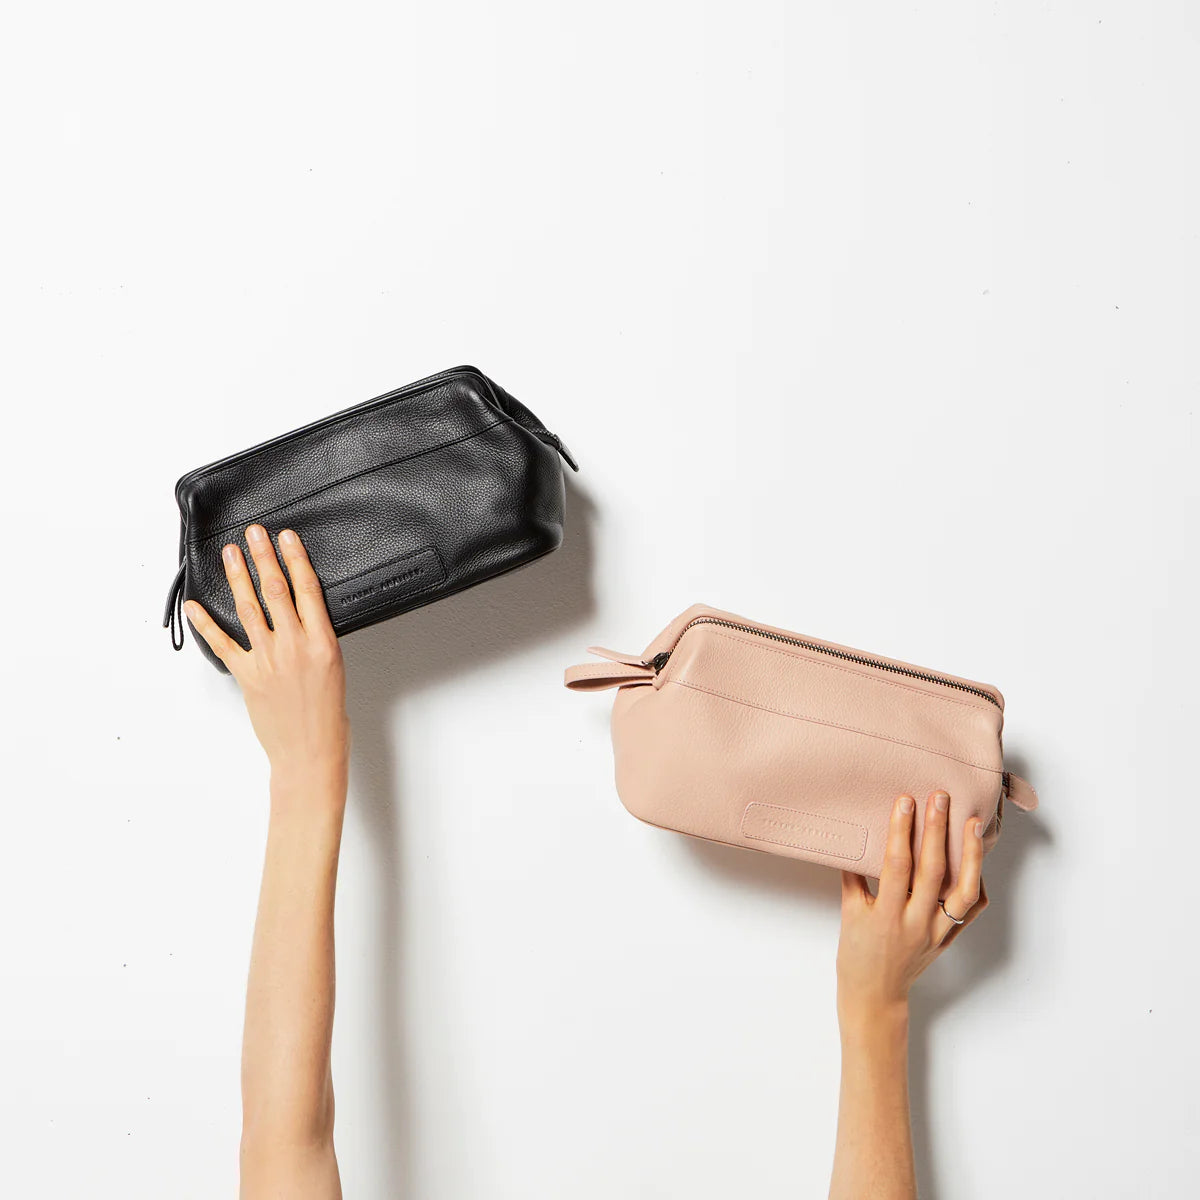 Status Anxiety leather toiletry bag